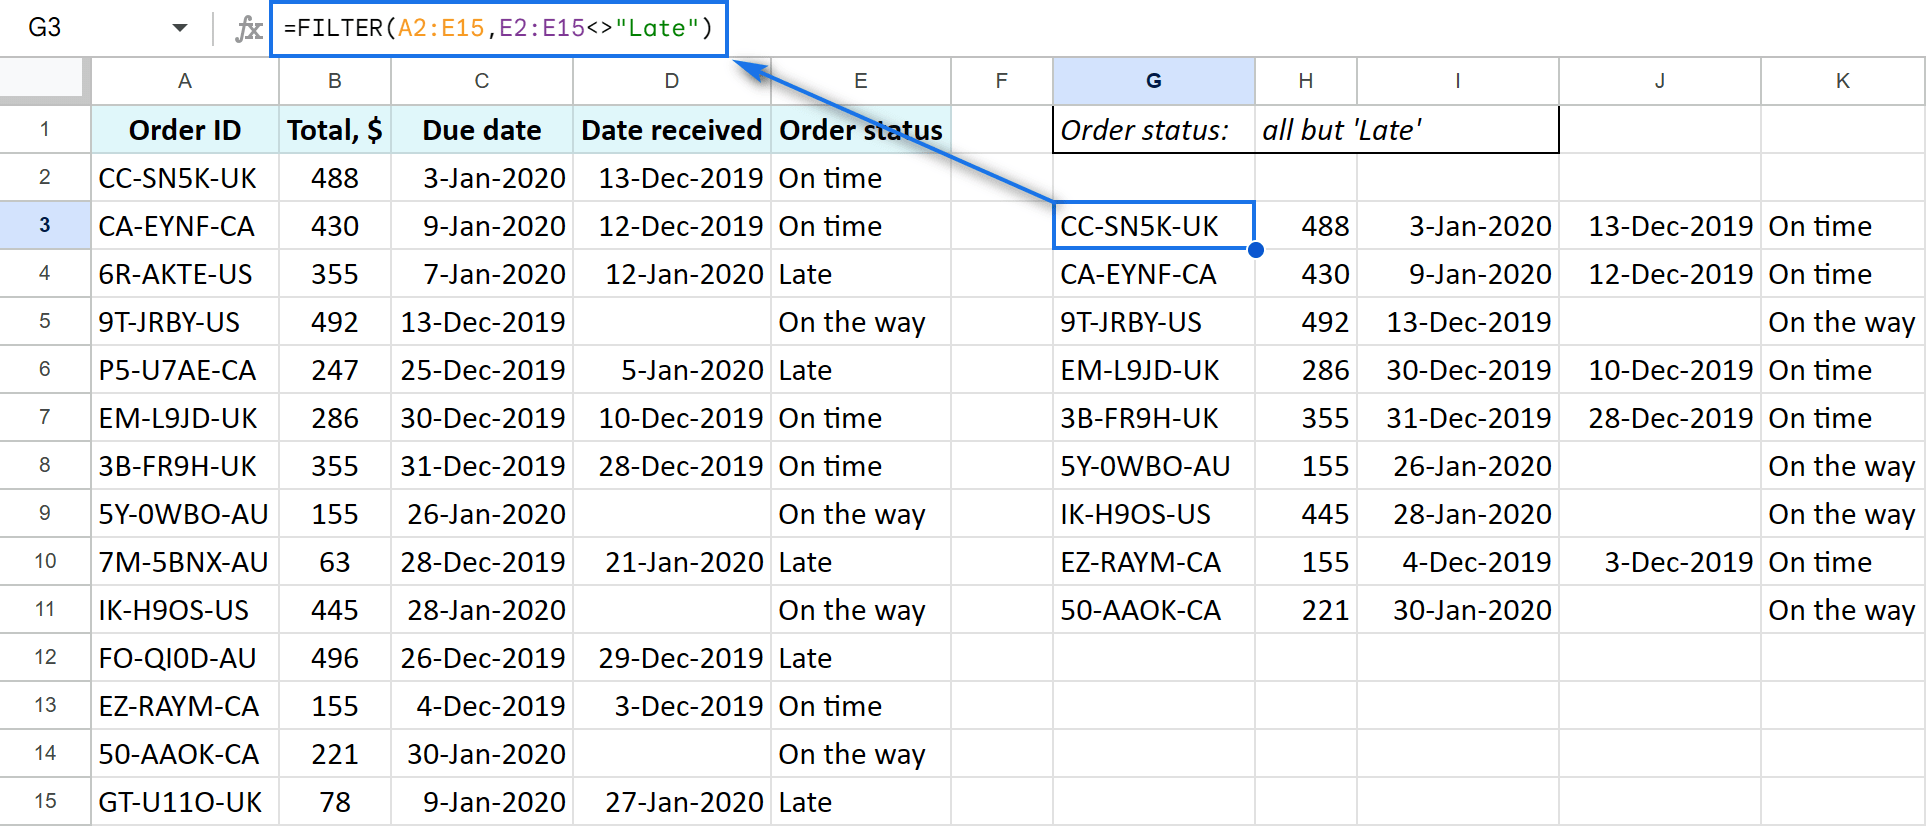 Get all rows where column E differs from a specified word.